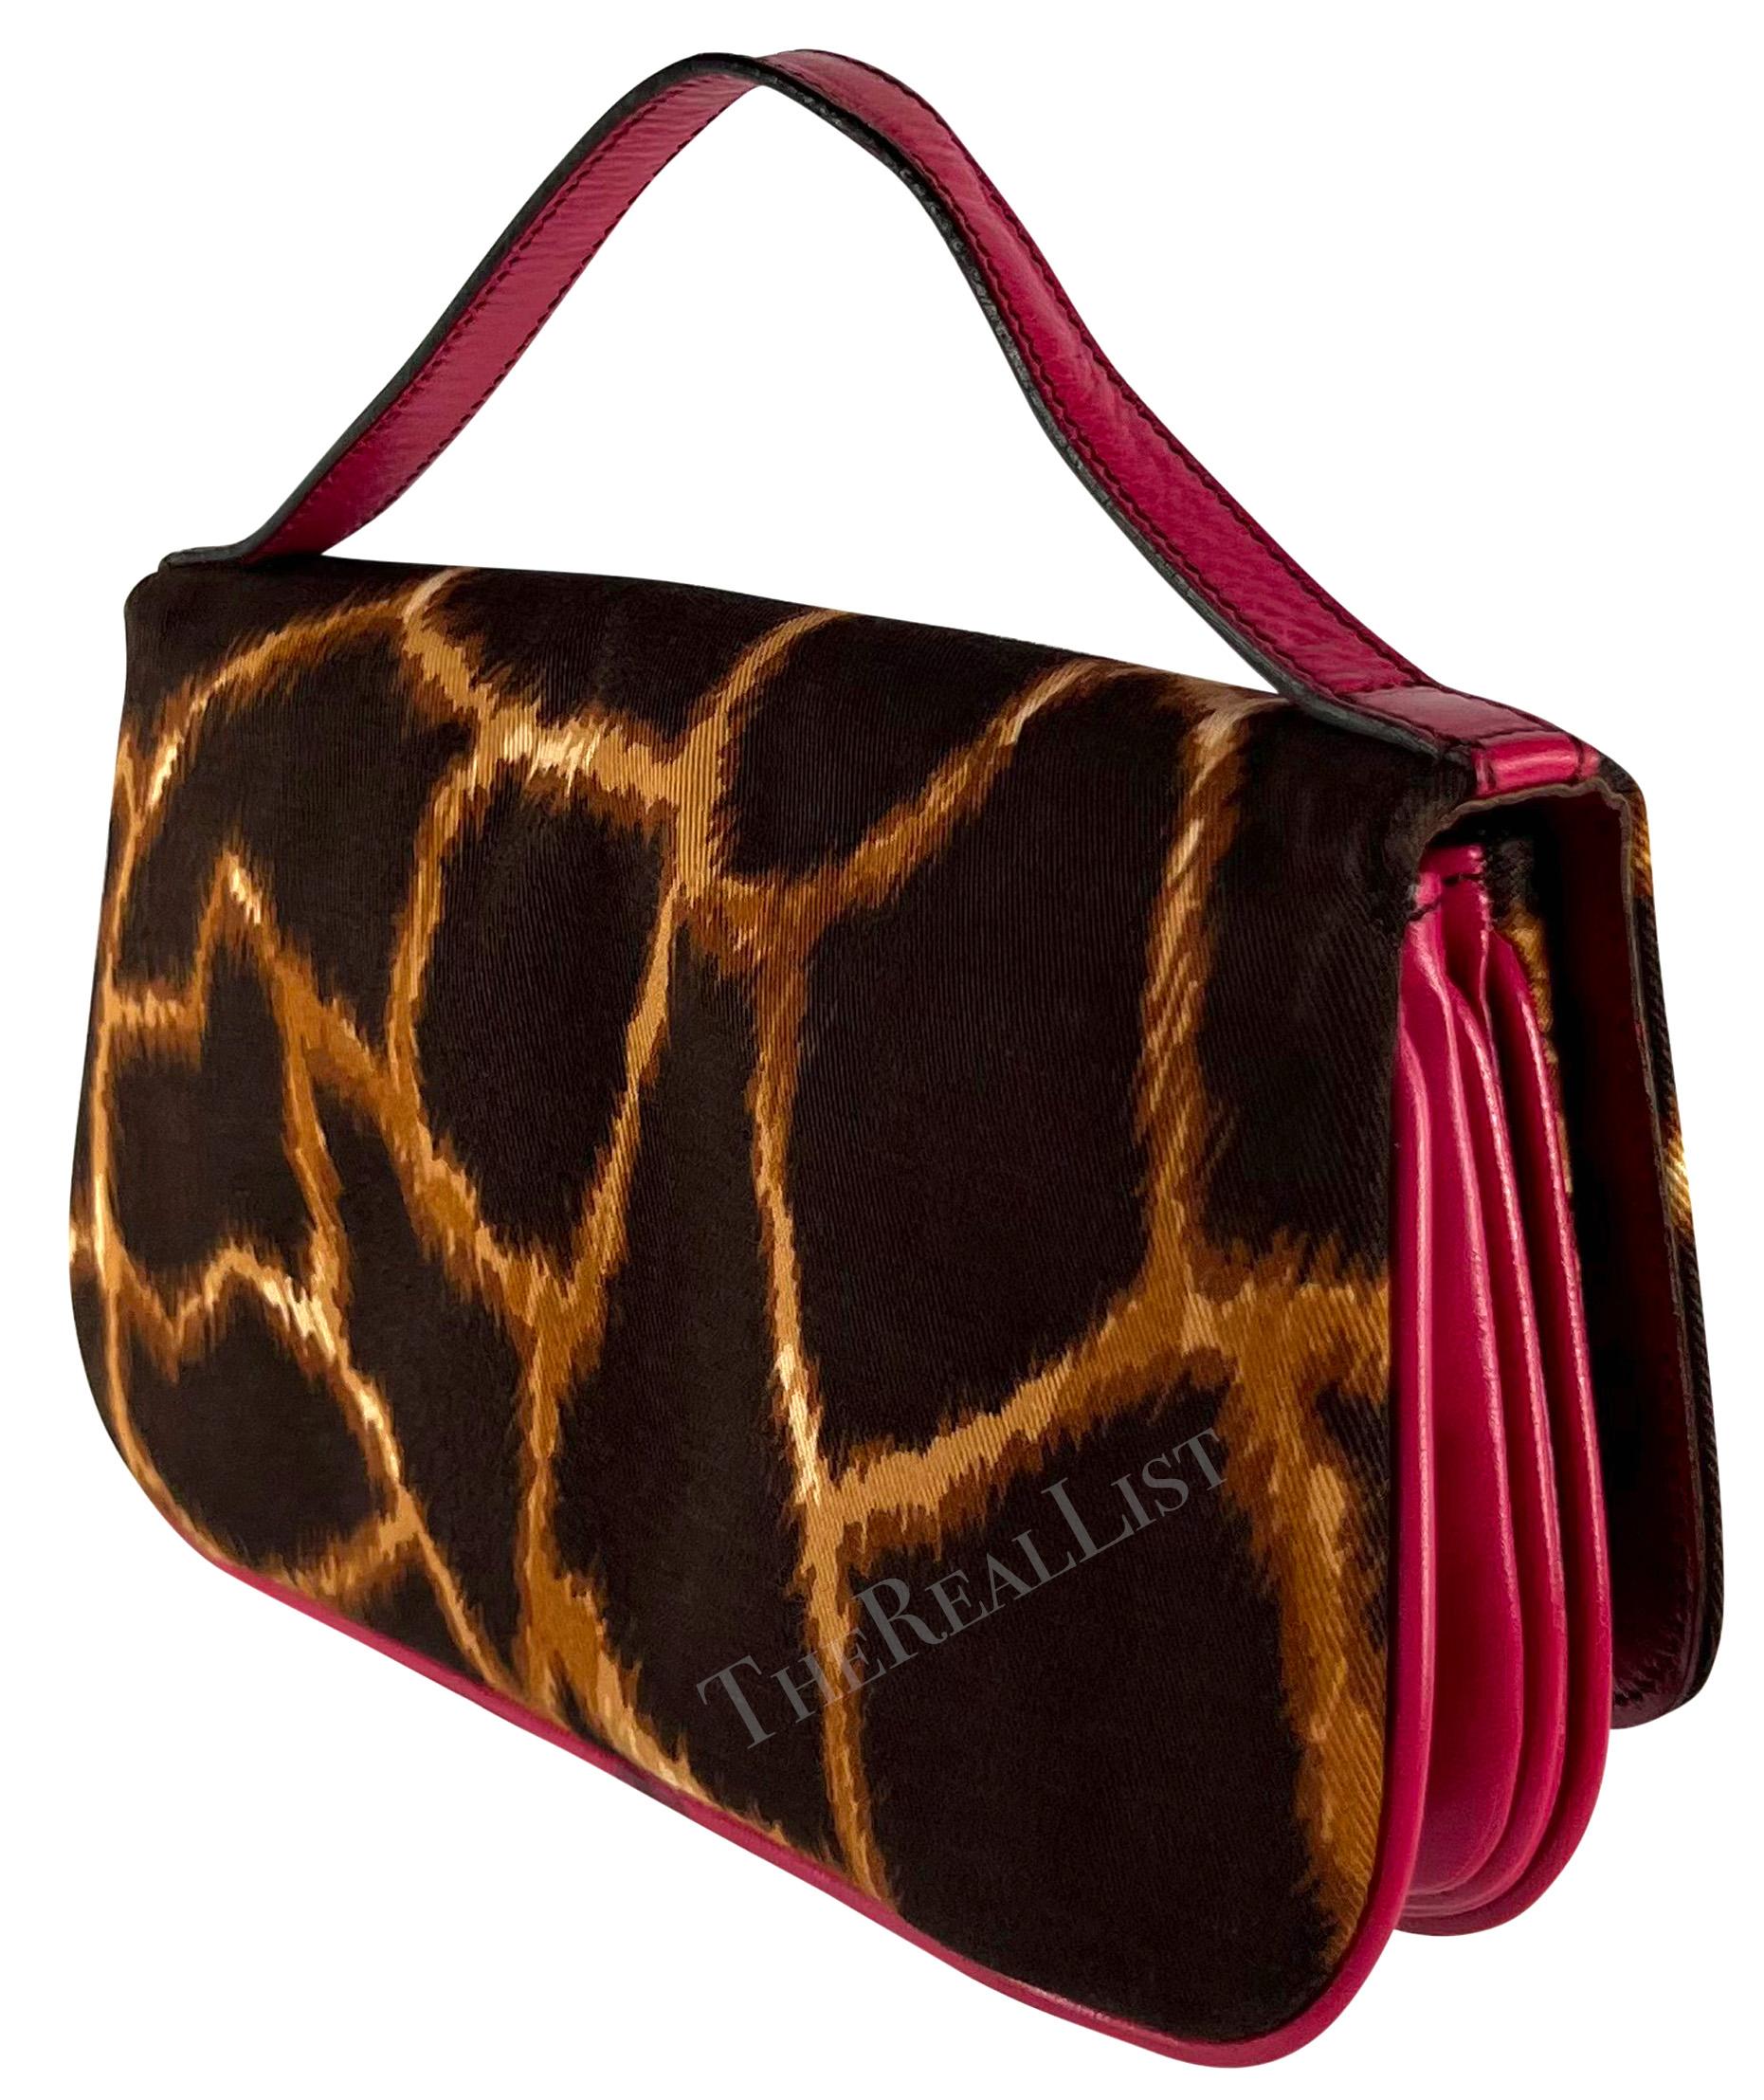 2000s Dolce & Gabbana Brown Animal Print Hot Pink Leather Top Strap Clutch Bag For Sale 2